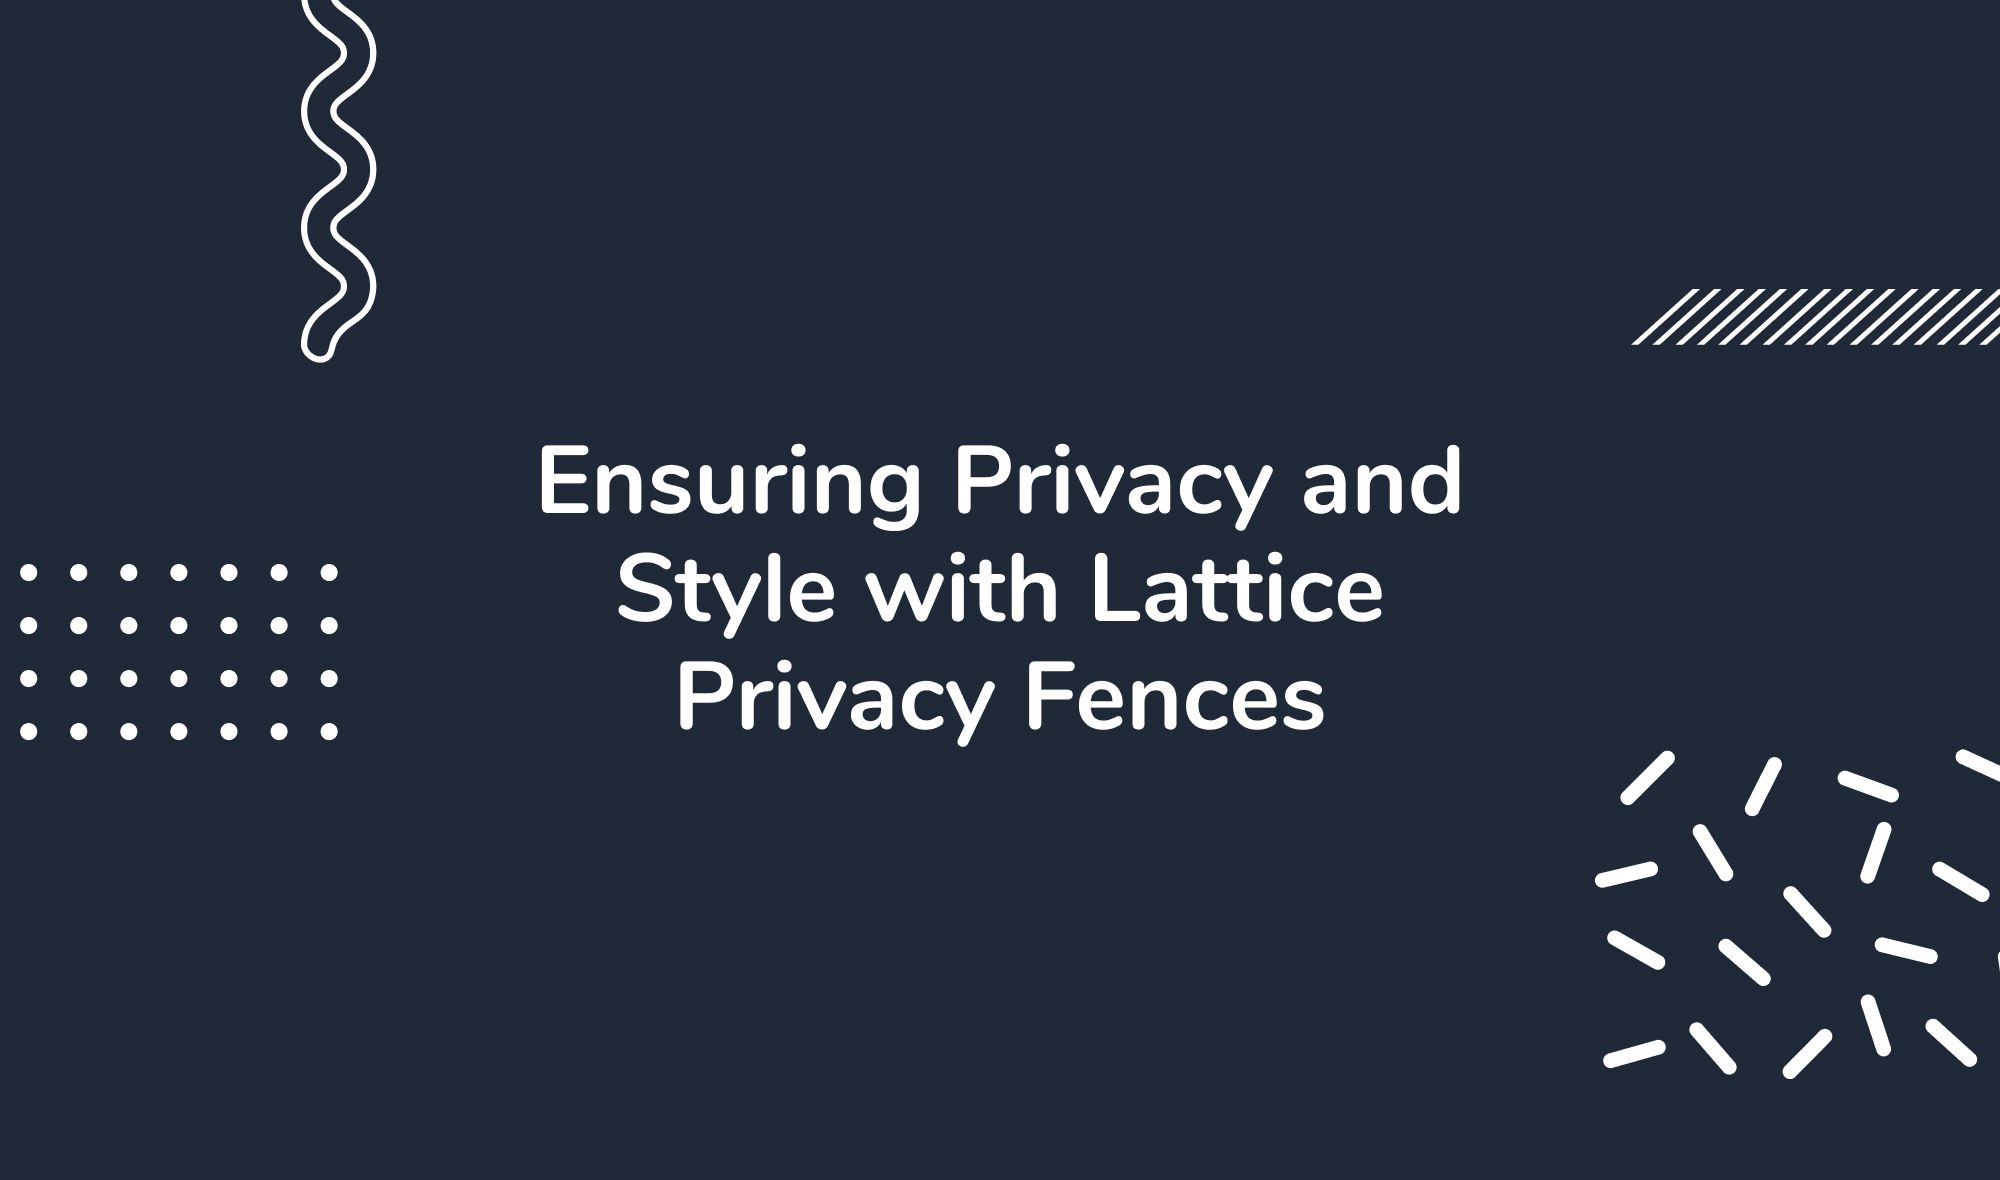 Ensuring Privacy and Style with Lattice Privacy Fences